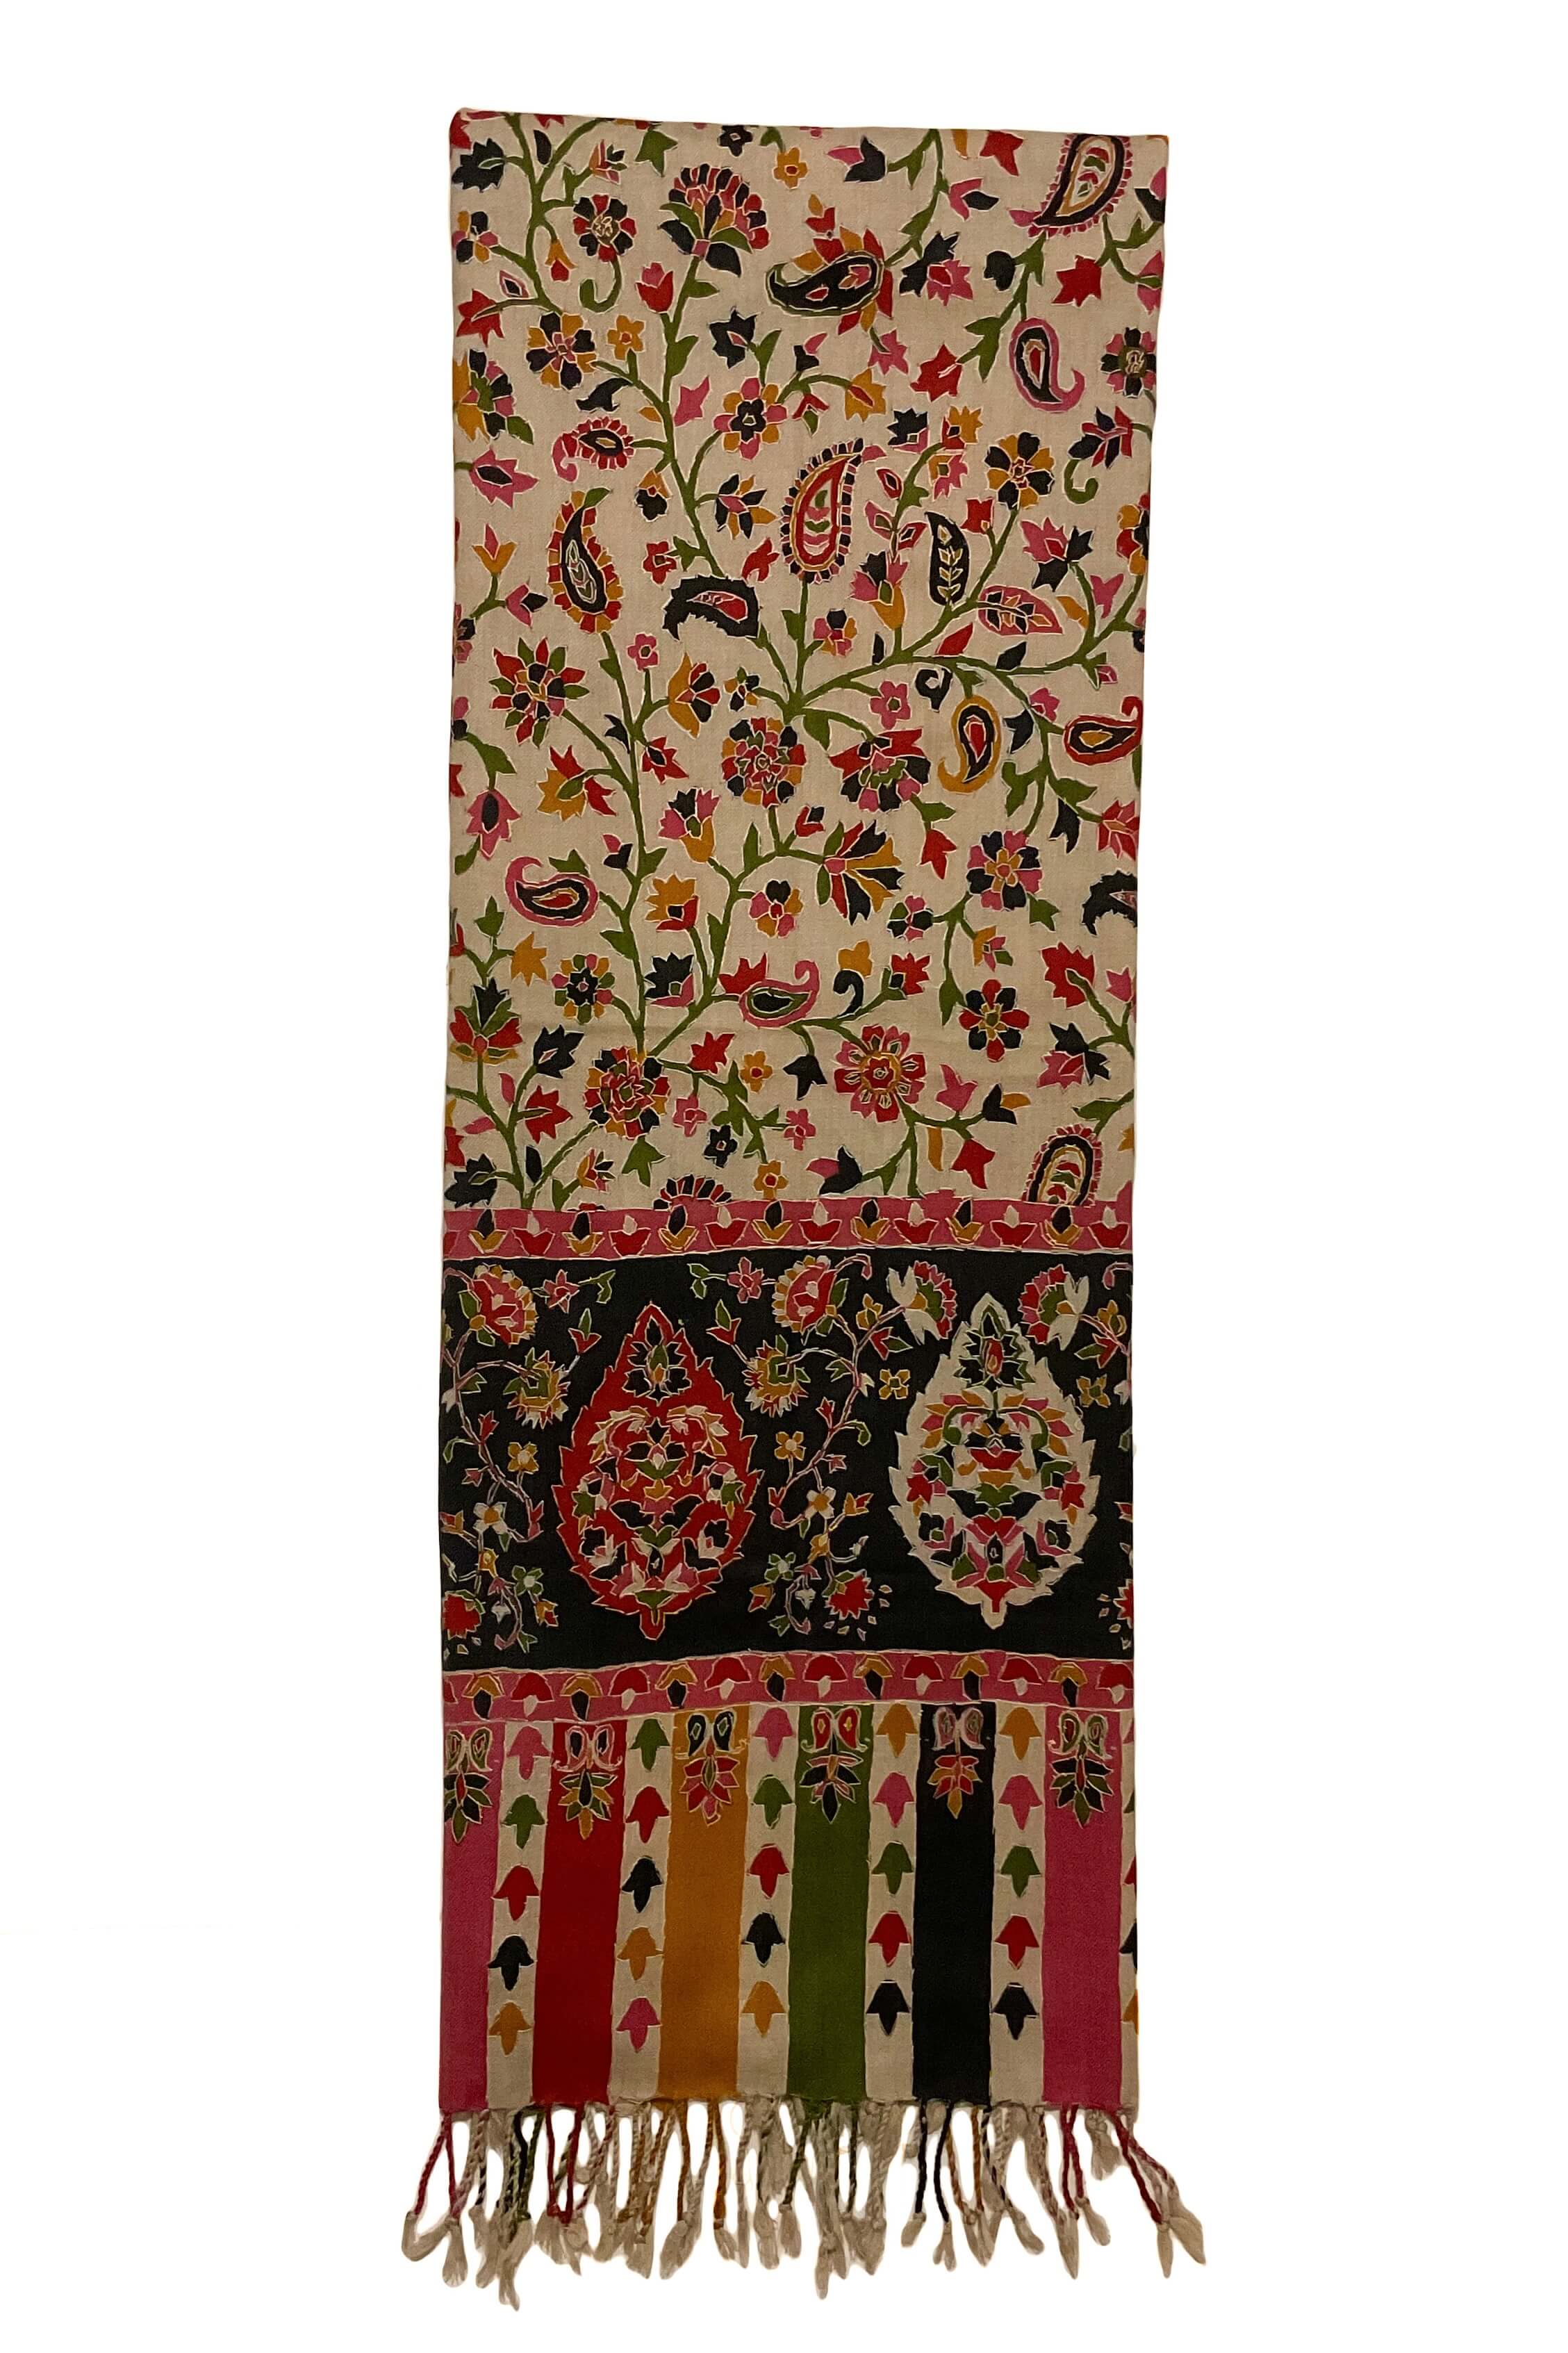 Beige, Black and Red Pashmina-Cashmere Scarf